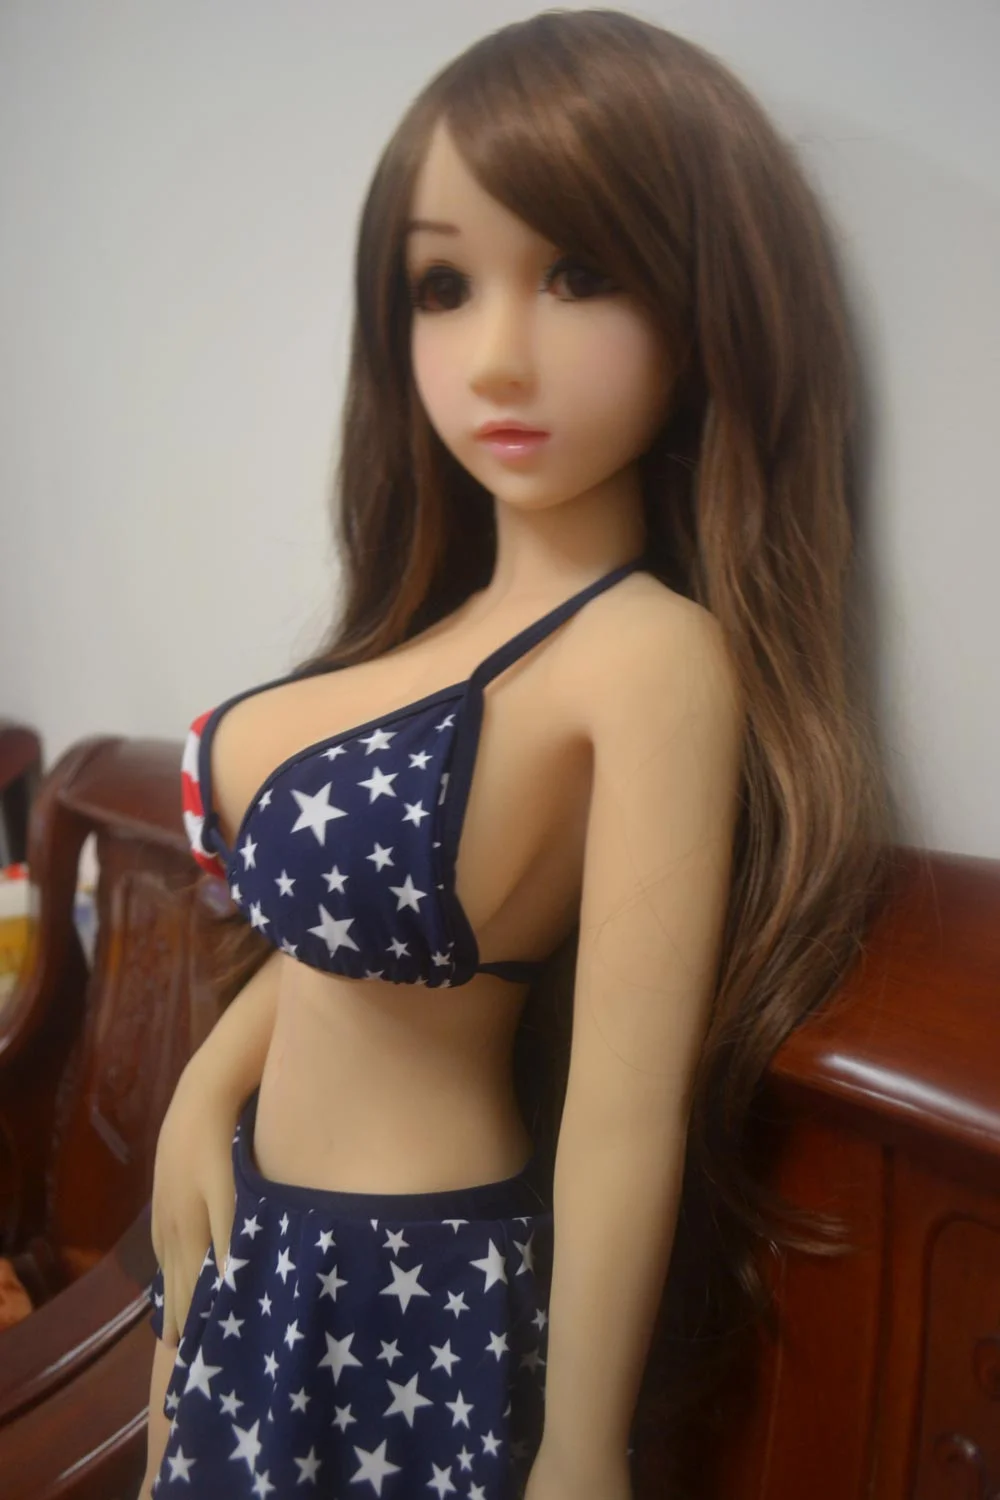 Mini sex doll with hands on skirt